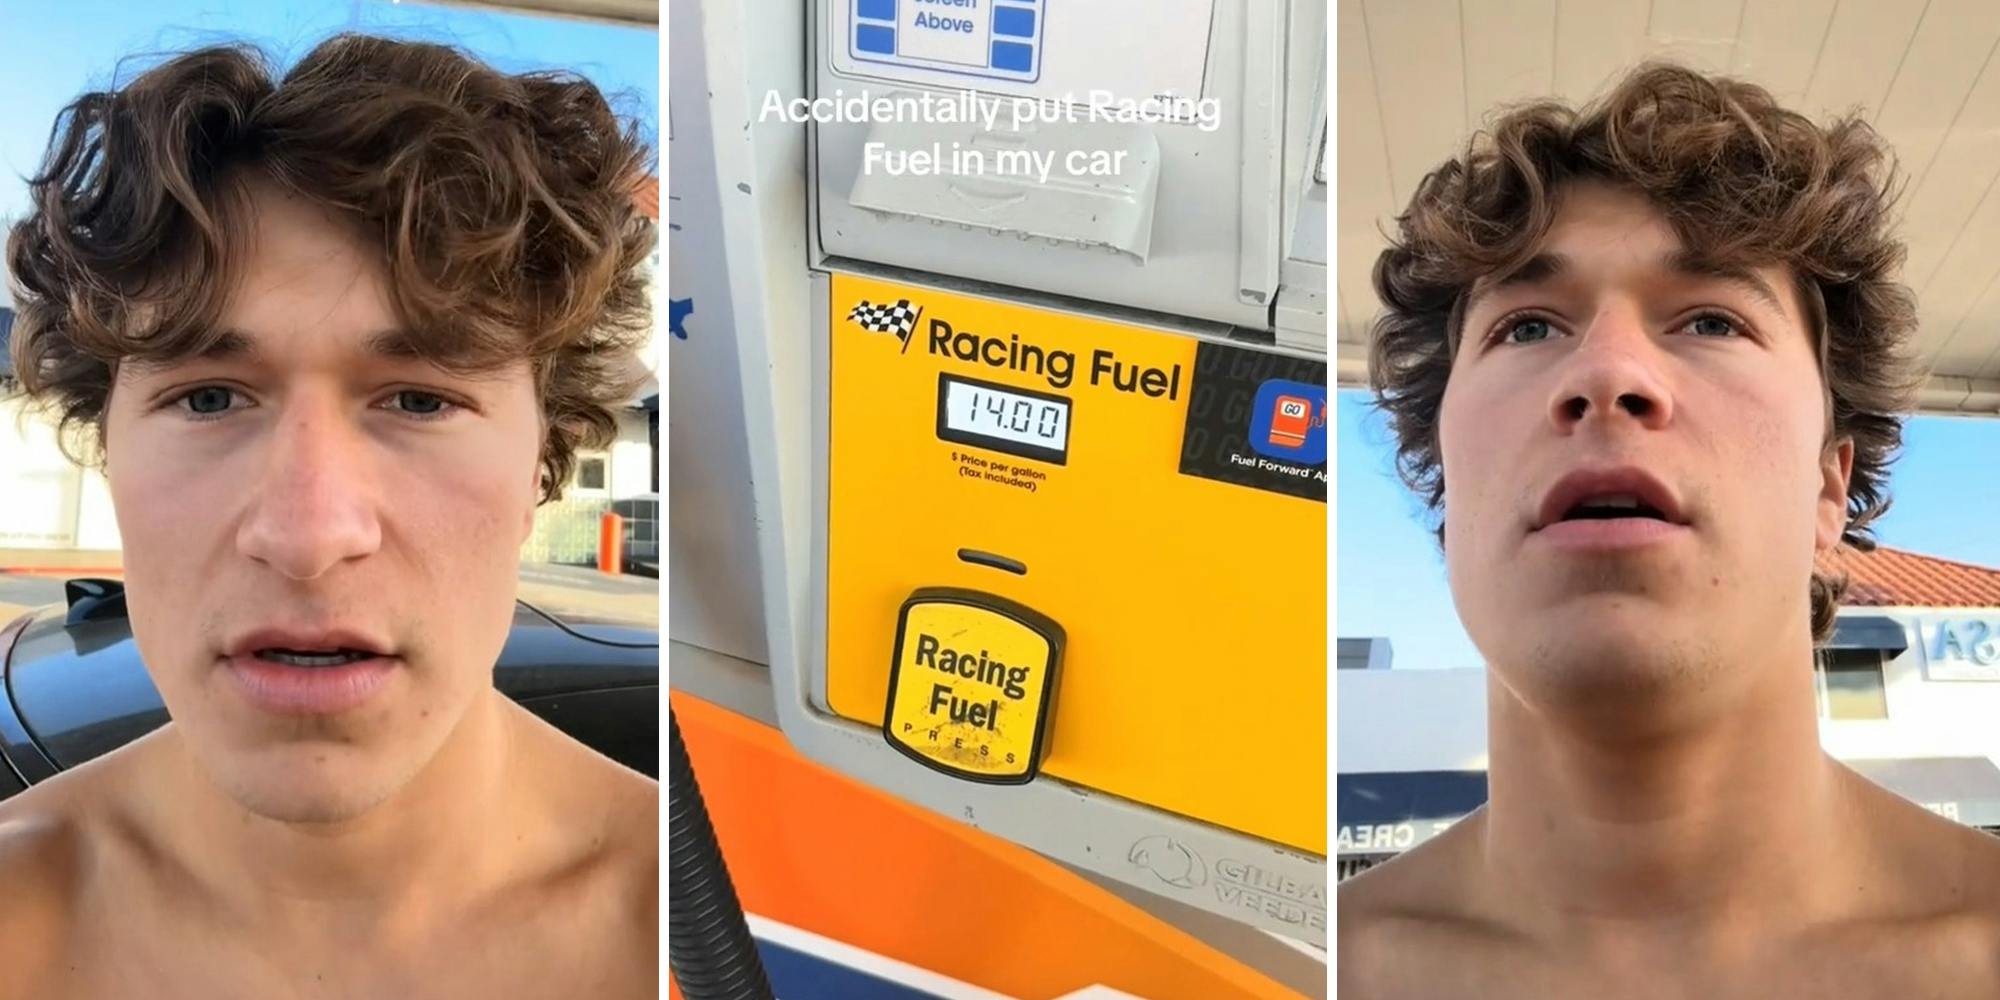 Gas station customer accidentally fills up car with 'racing fuel